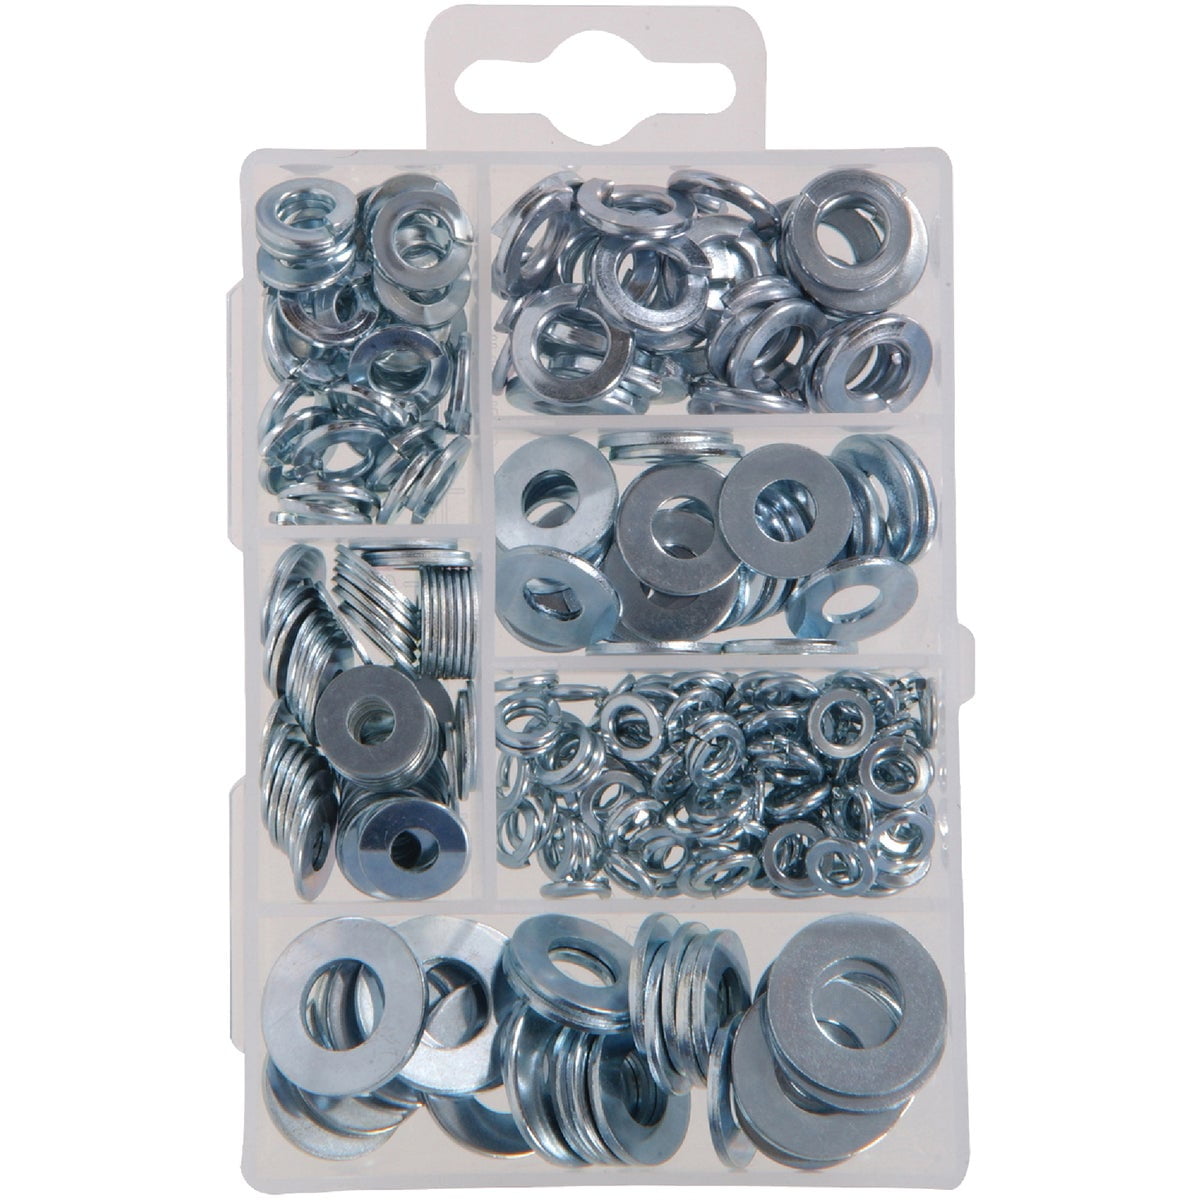 Washer Assortment 105 Piece Stainless Steel Flat Washers M3 M4 M5 M6 M8 M10 Set 